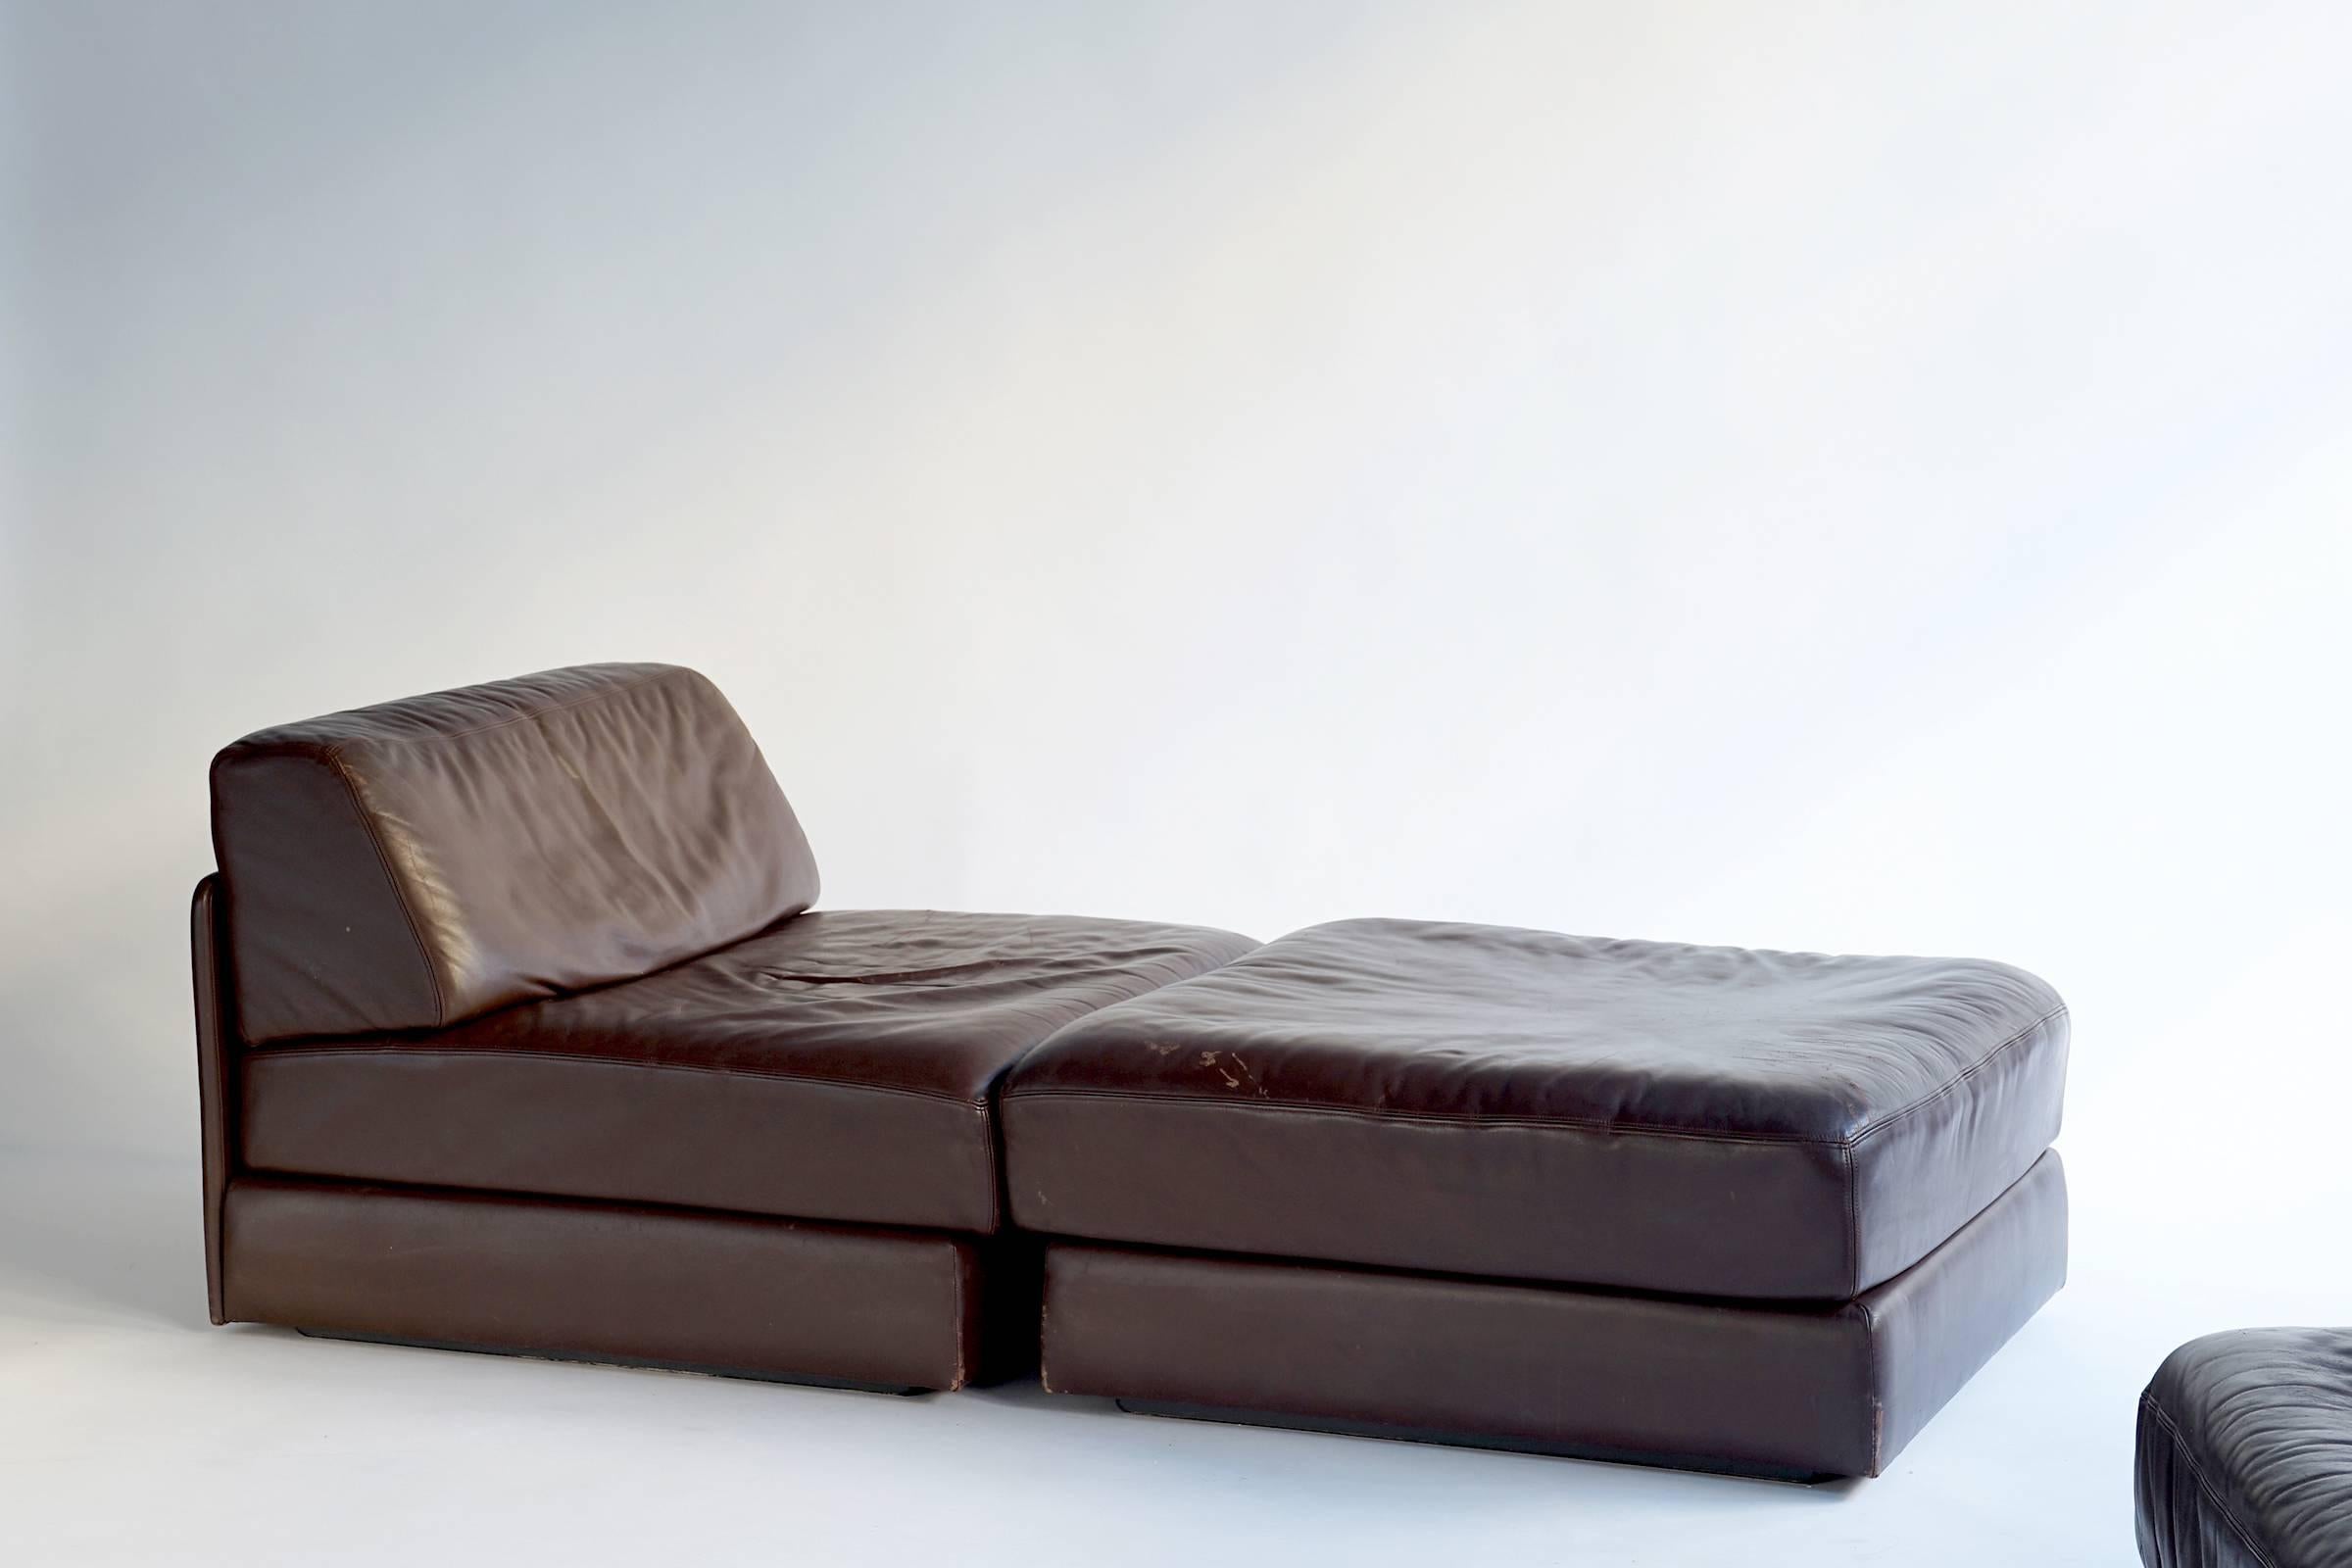 All original leather set comprised of two armless seats and two ottomans. Each of the four pieces flips open into an individual guest bed. Versatile and functional with natural patina.

The two armless seats measure W 36